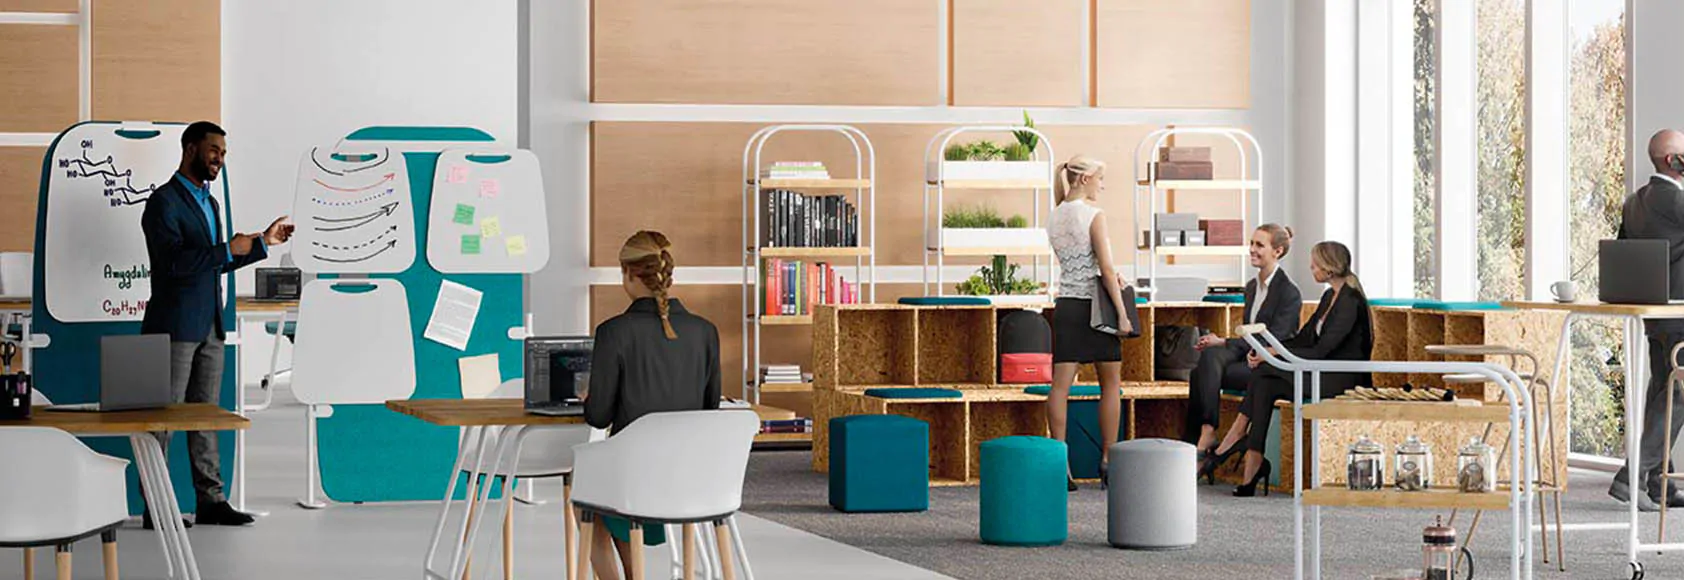 Open plan or closed offices? | Ofita